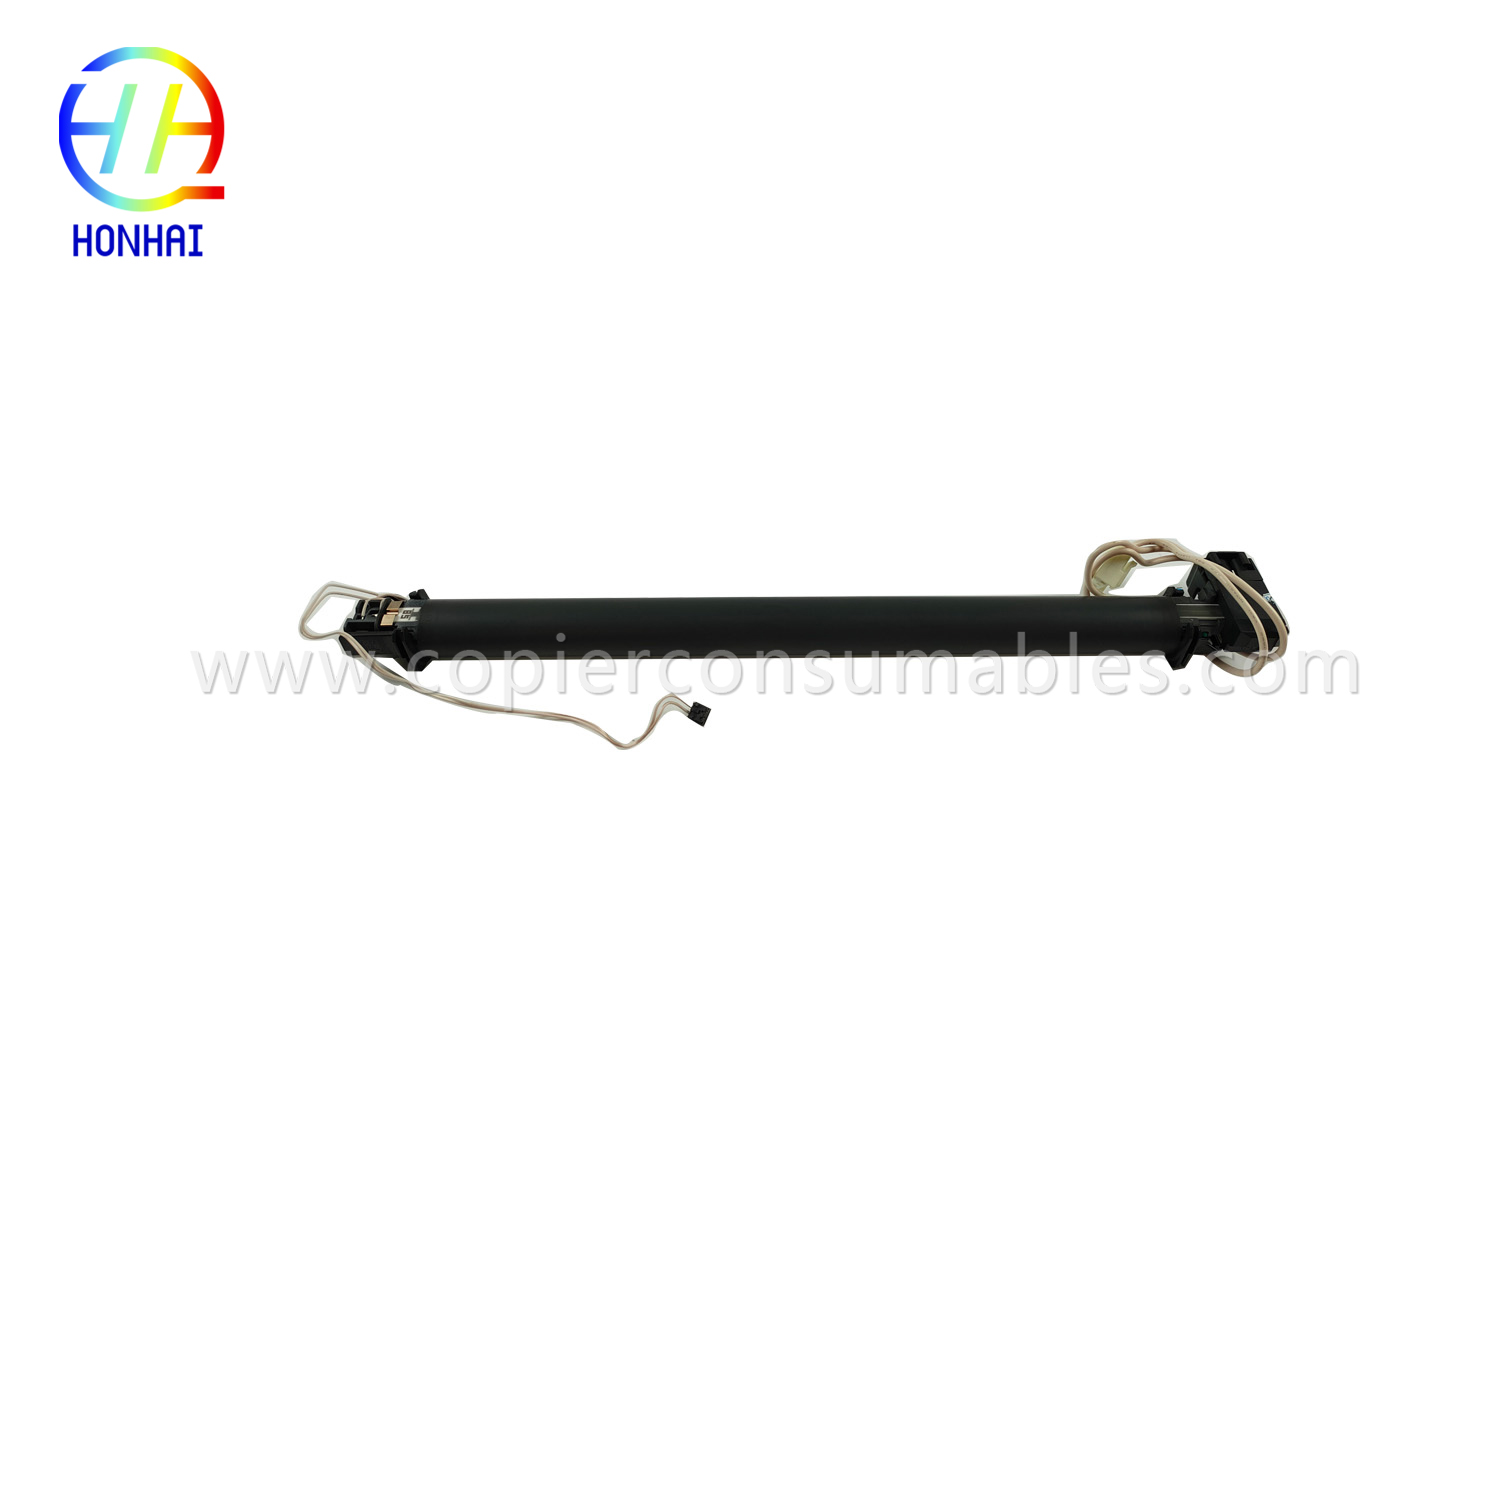 Fixing Film Assembly for HP M203 M227 M230